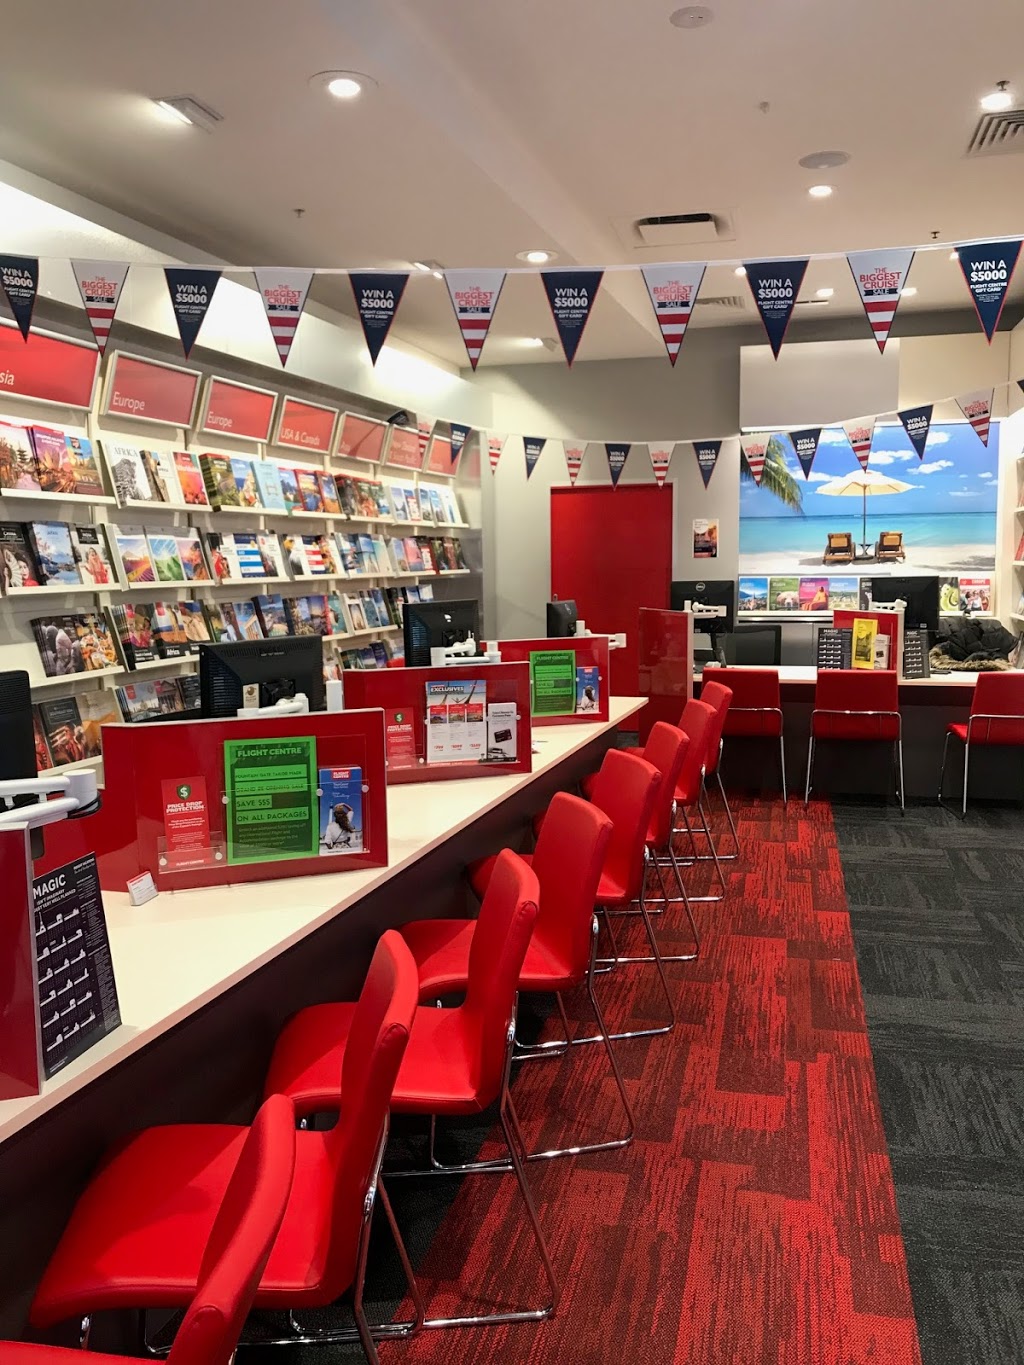 Flight Centre Fountain Gate - Tailor Made | travel agency | Shop 1154, Westfield Fountain Gate, 25-55, Overland Dr, Narre Warren VIC 3805, Australia | 1300078404 OR +61 1300 078 404